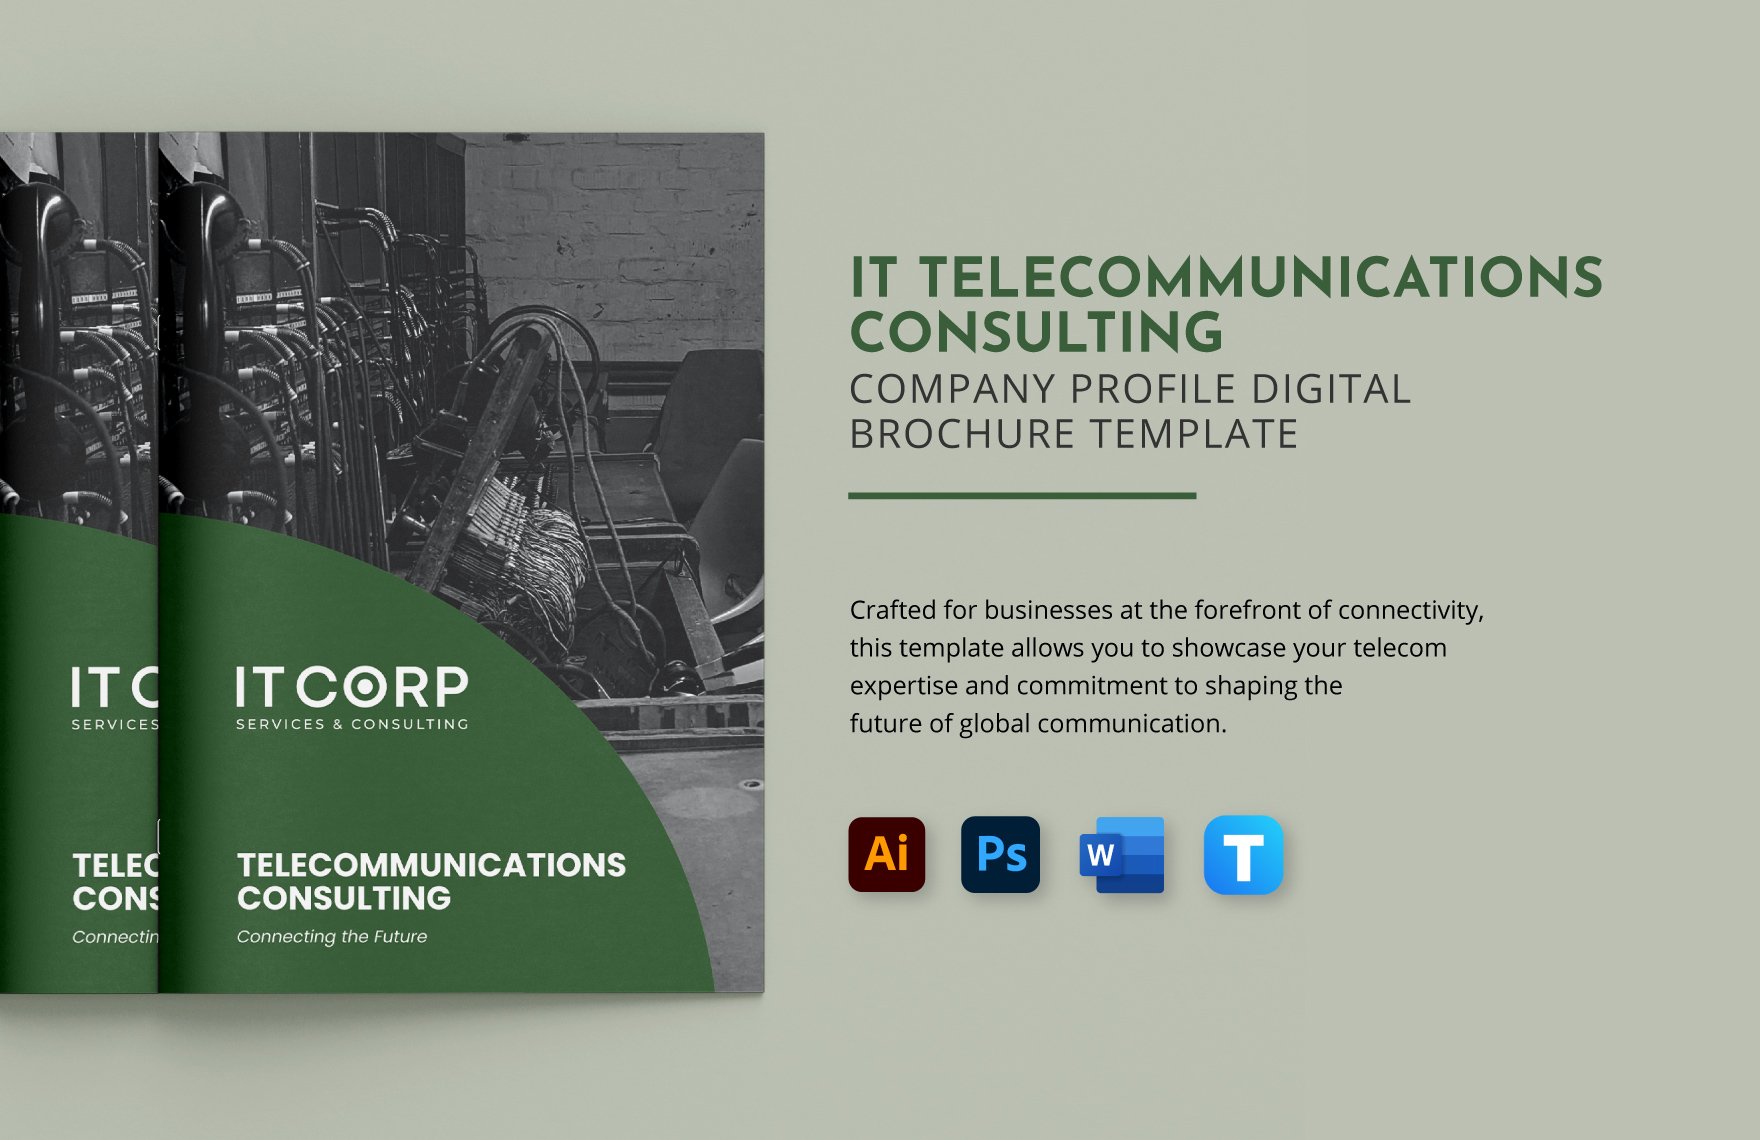 IT Telecommunications Consulting Company Profile Digital Brochure Template in Word, Illustrator, PSD